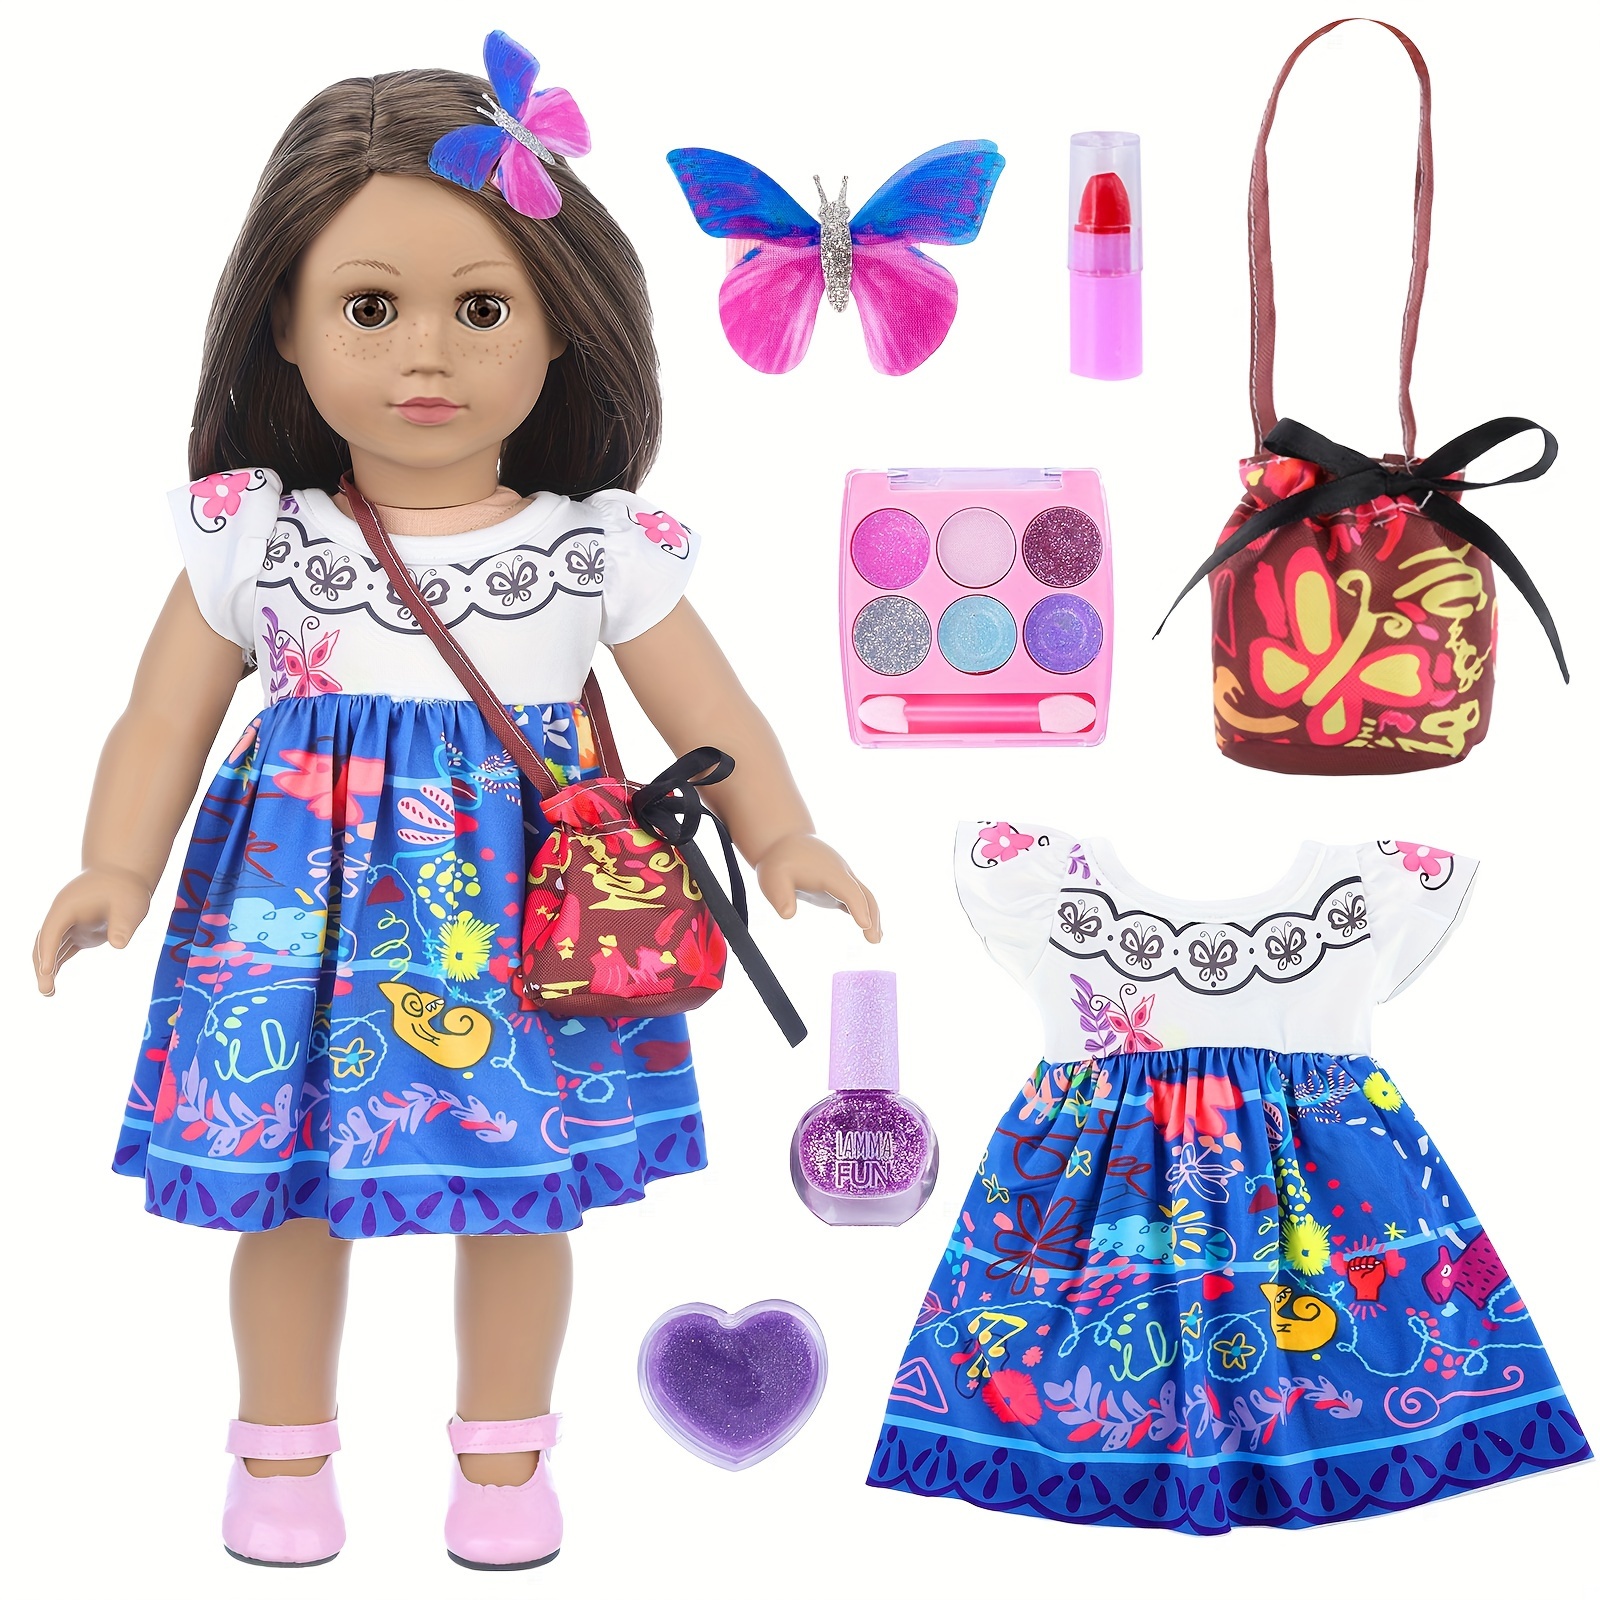 

18 Inch Doll Clothes And Accessories Magical House Inspired By Mira-bel Halloween Custom For 18 Inch Dolls (no Doll) (mira-bel)